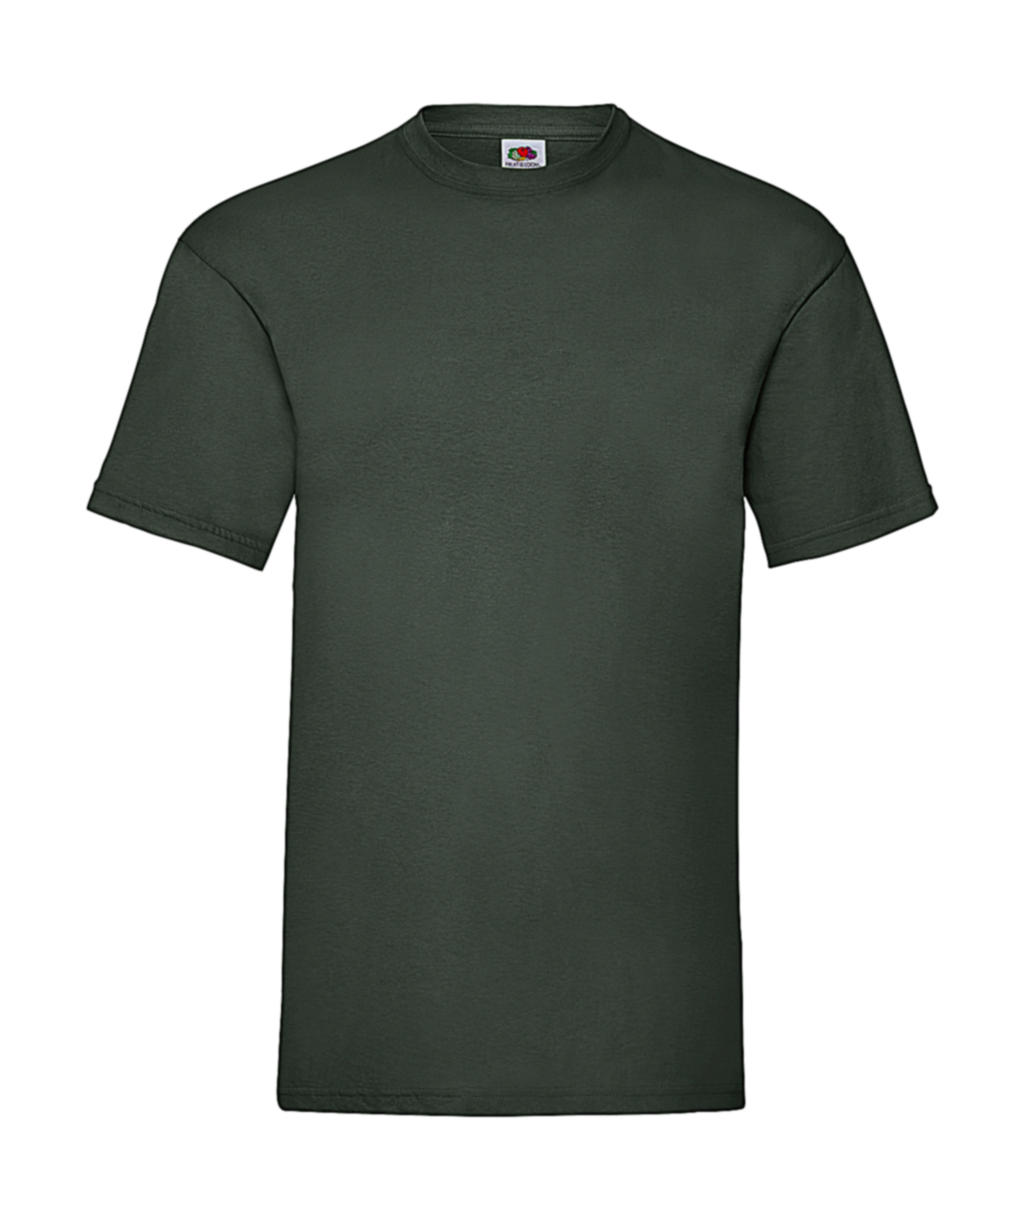  Valueweight Tee in Farbe Bottle Green